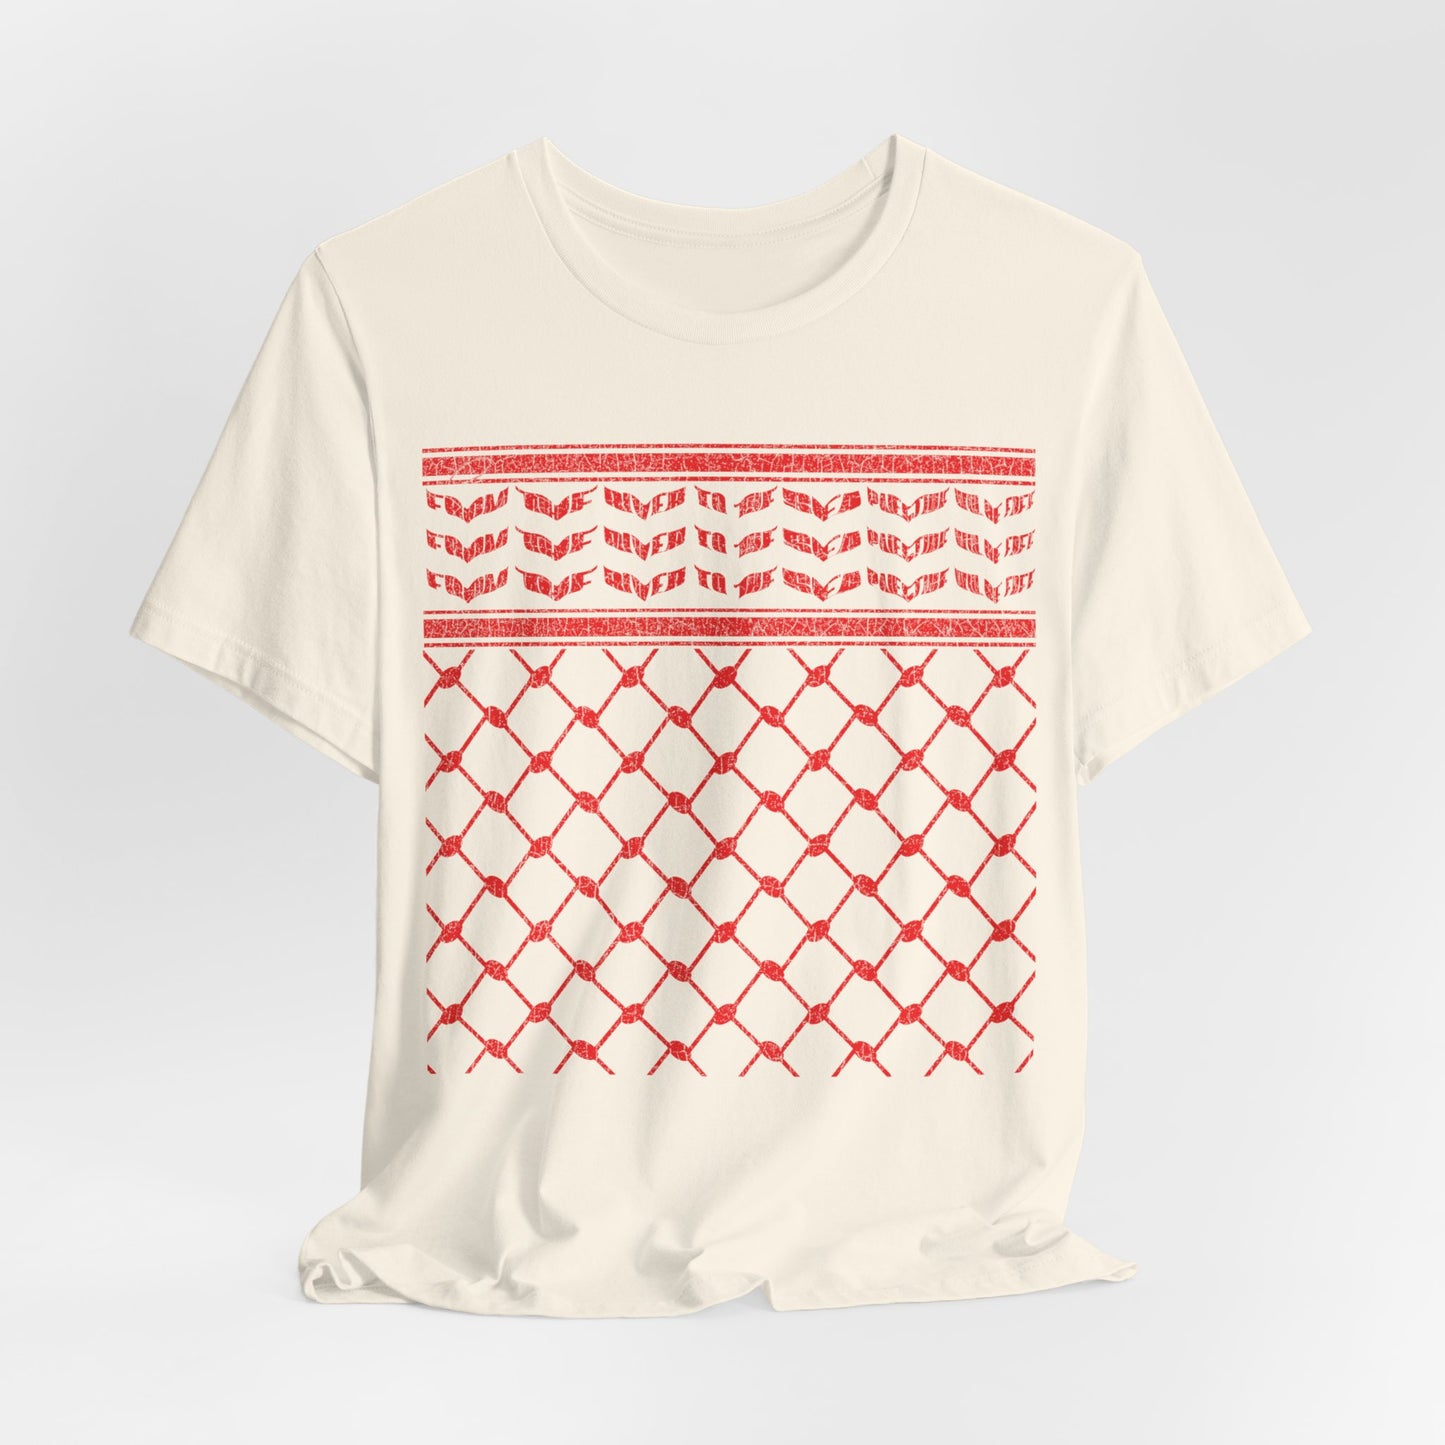 Adult | From The River To The Sea | Keffiyeh Design | Short Sleeve Tee